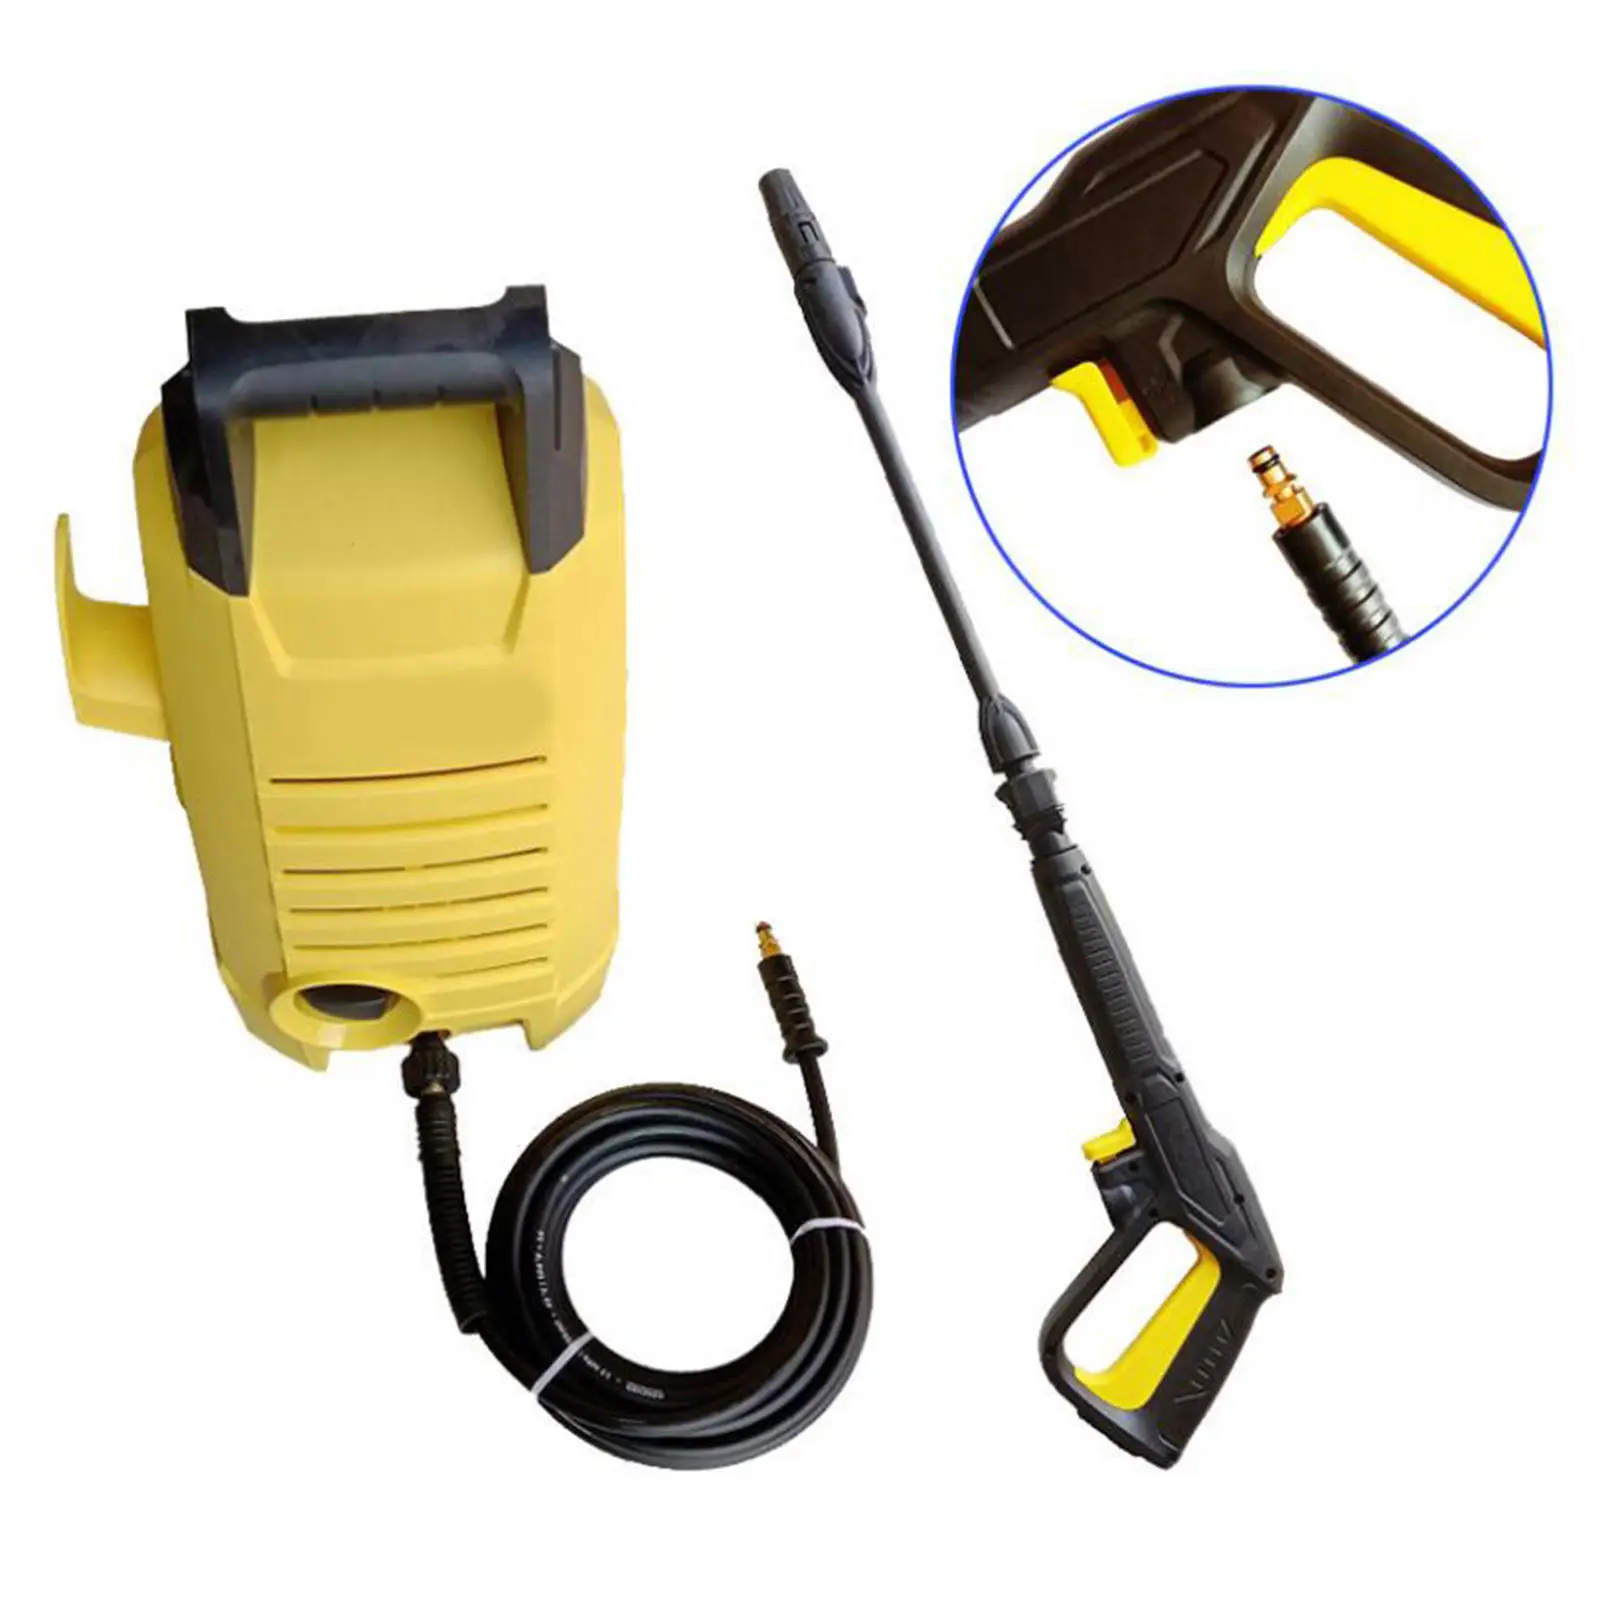 Pressure Washer Spray Gun 2175 PSI High Power with Extension Wand Car Washer for  K-series Garden Watering